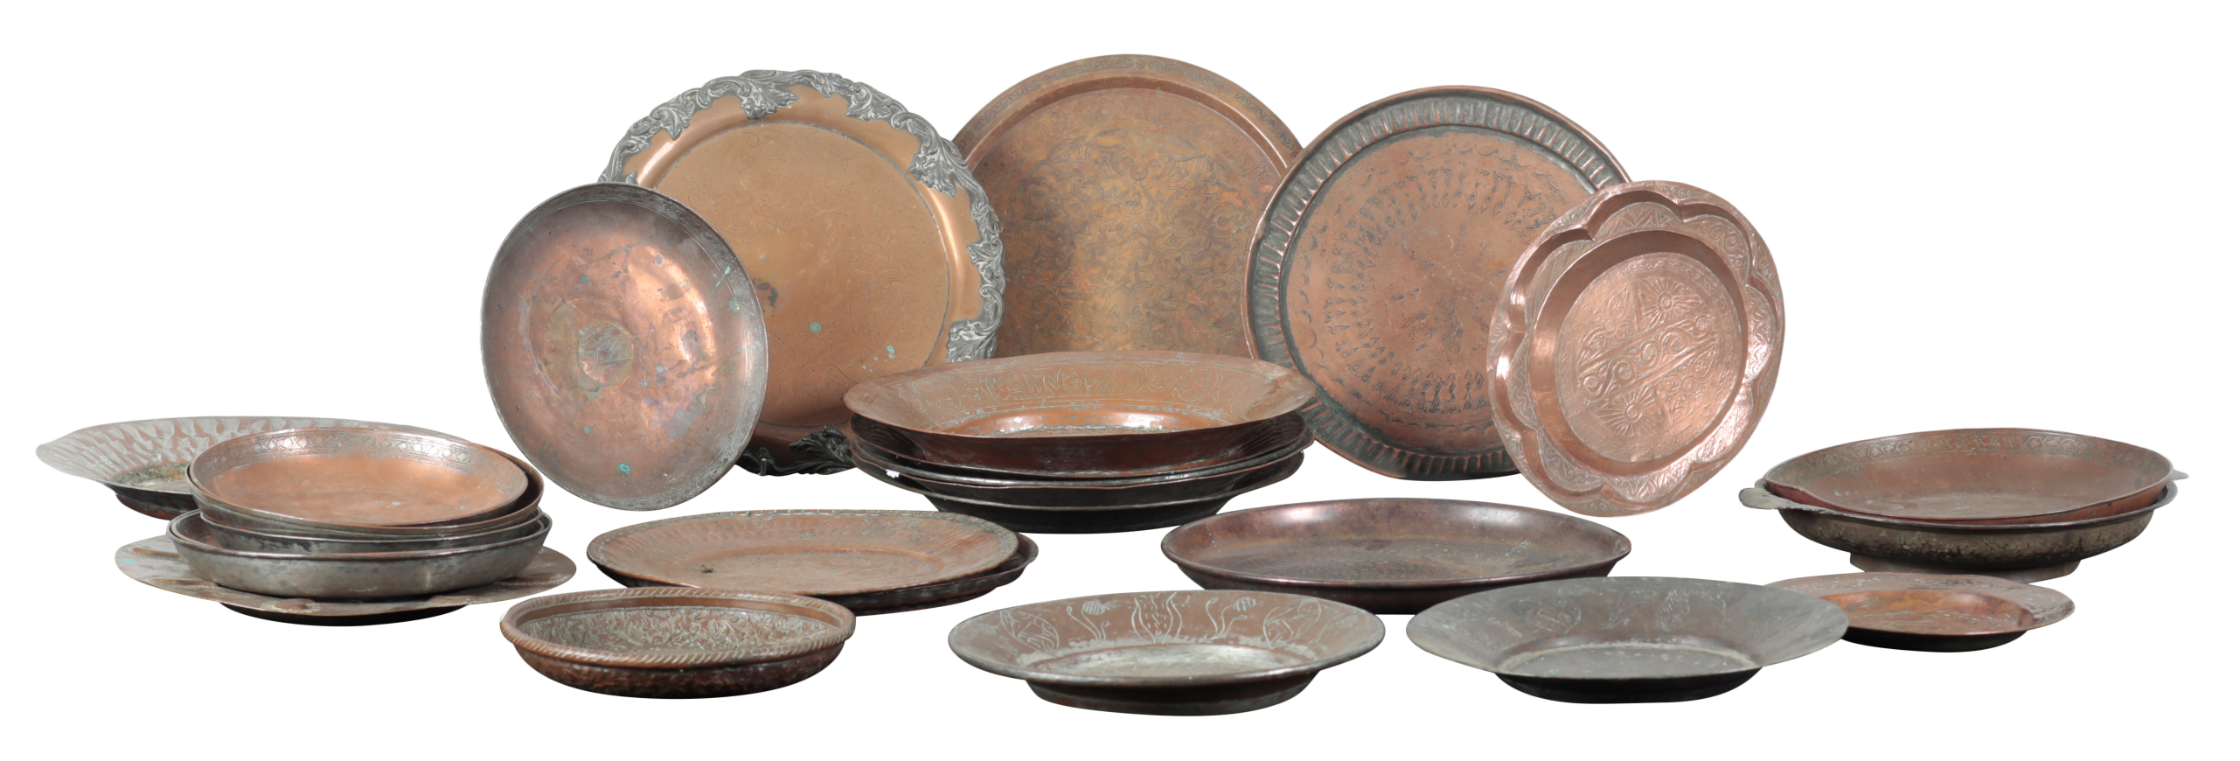 A LARGE COLLECTION OF EASTERN COPPER